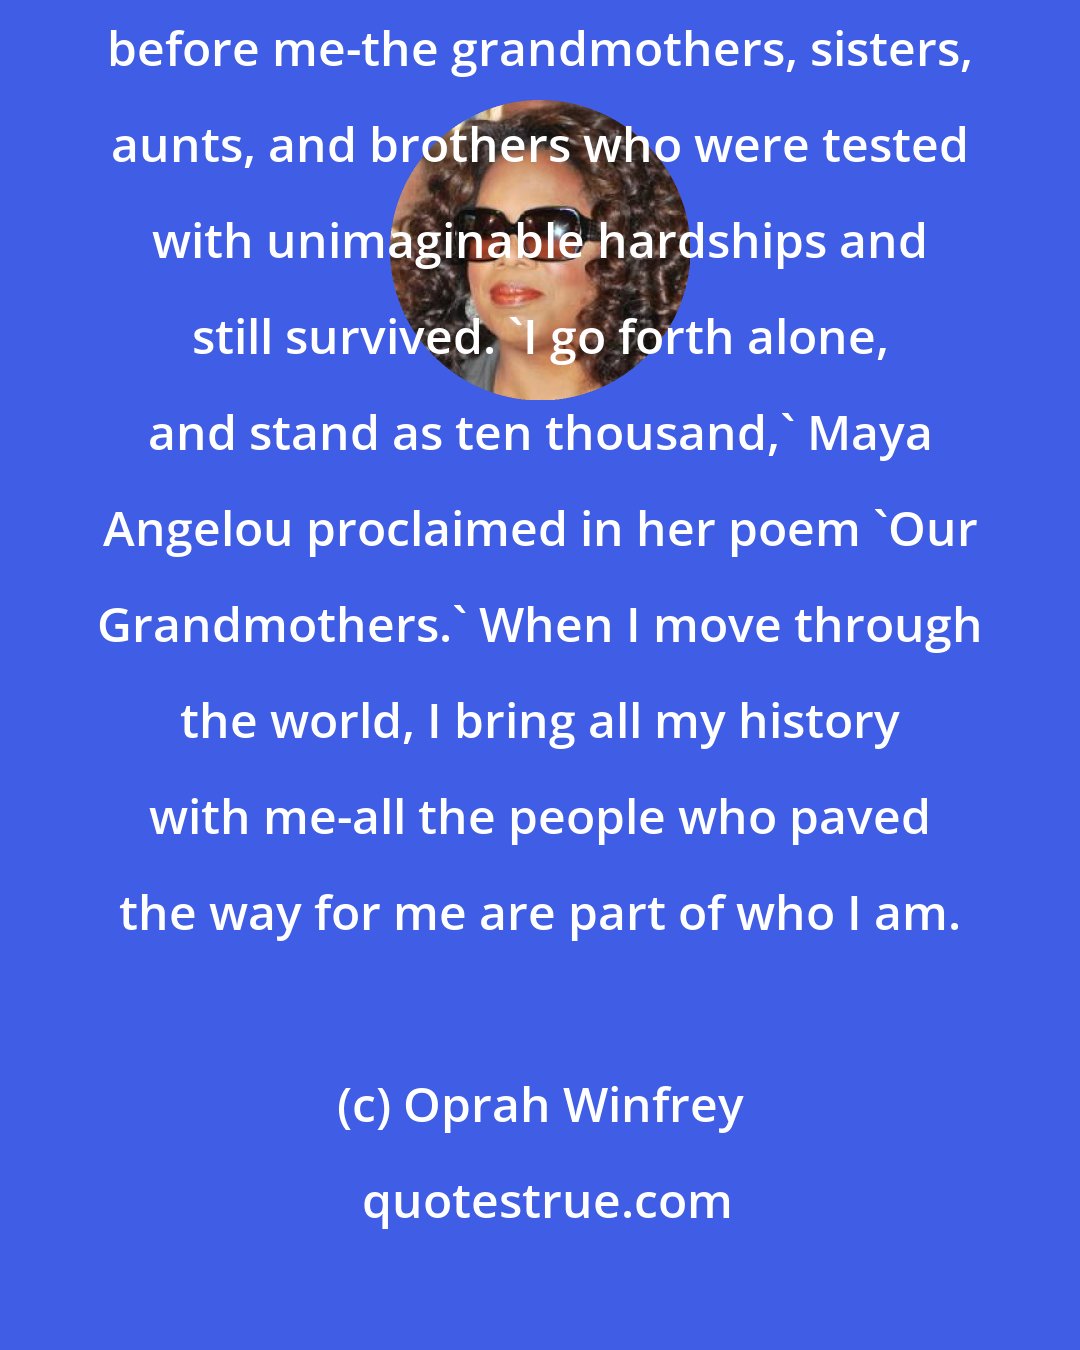 Oprah Winfrey: I've learned to rely on the strength I inherited from all those who came before me-the grandmothers, sisters, aunts, and brothers who were tested with unimaginable hardships and still survived. 'I go forth alone, and stand as ten thousand,' Maya Angelou proclaimed in her poem 'Our Grandmothers.' When I move through the world, I bring all my history with me-all the people who paved the way for me are part of who I am.